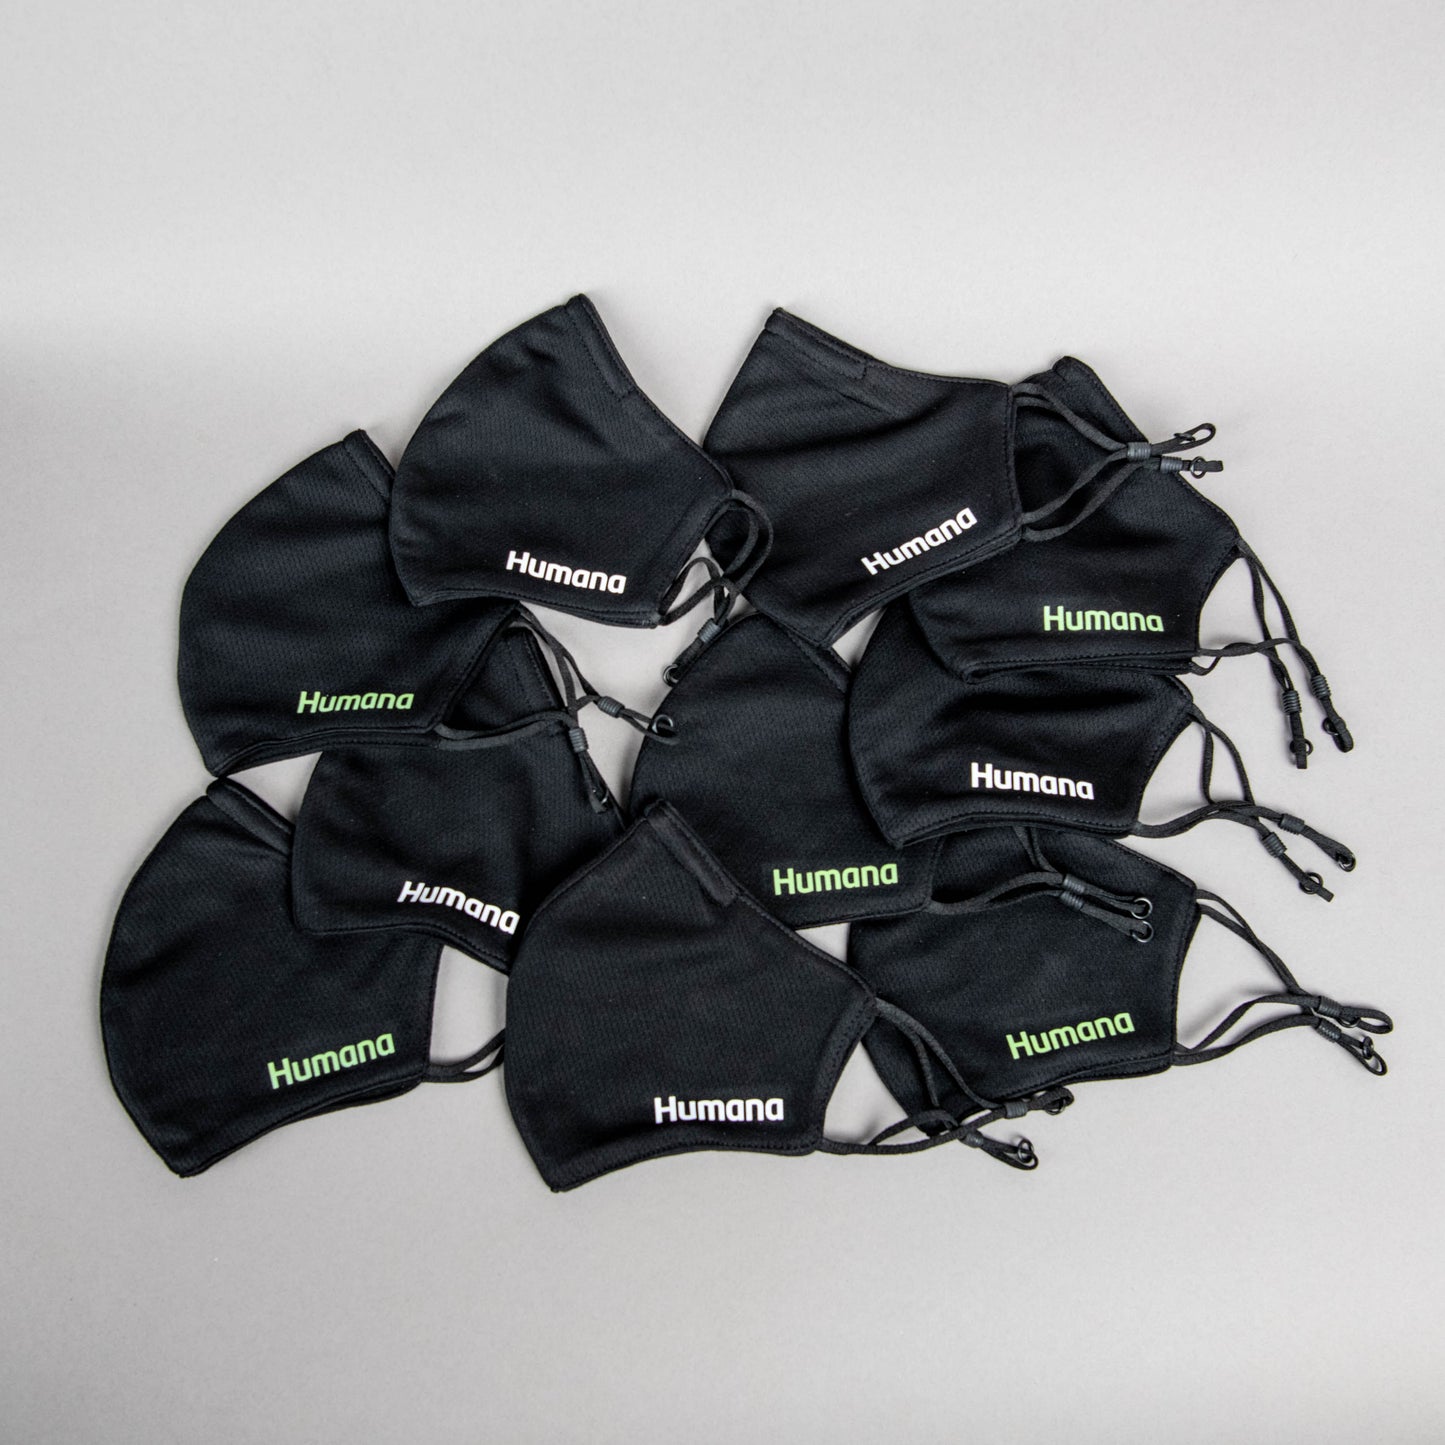 New!!!! Humana Adult Value 10-Pack with Adjustable Ear Loops in 2 Sizes!!!!